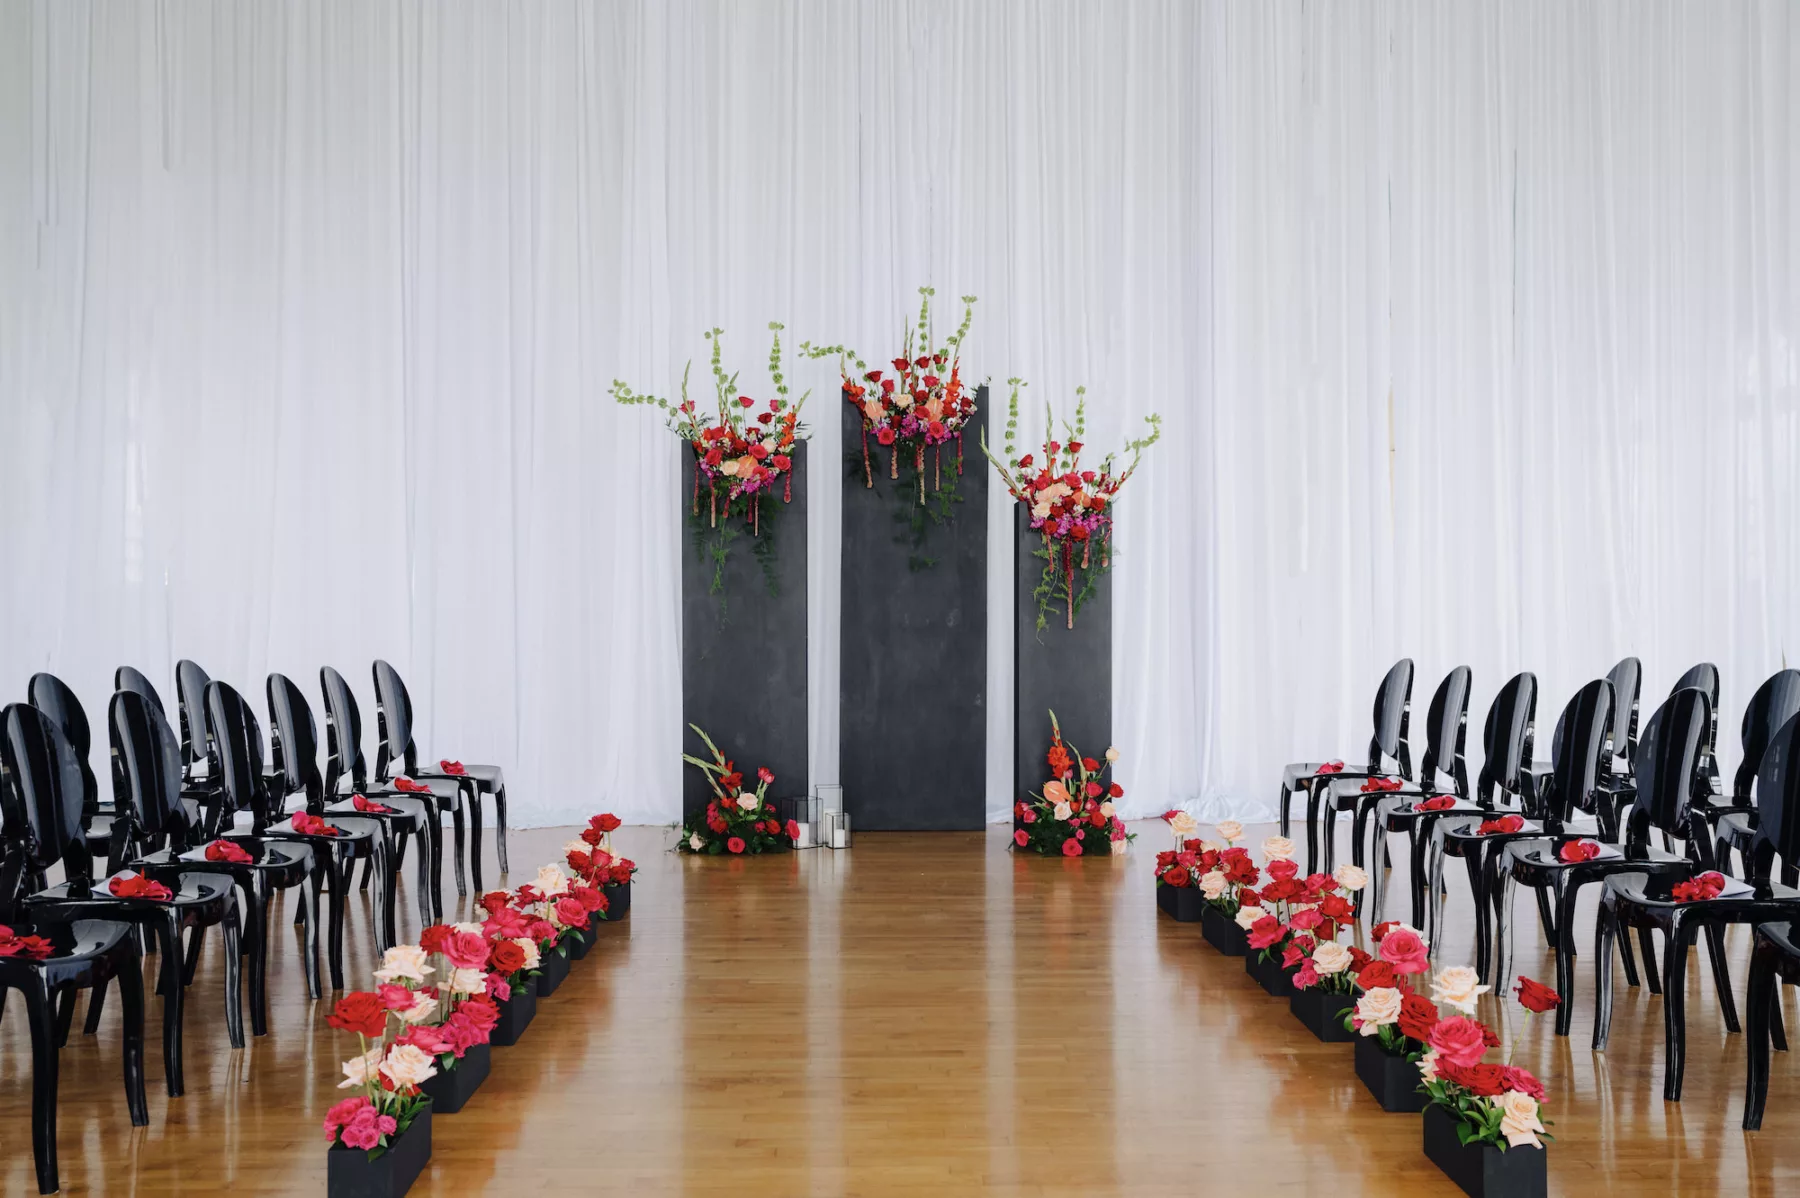 Modern Black and Pink Italian Inspired Wedding Ceremony Ideas | Unique Seating with Black Ghost Chairs Inspiration | Pink and Red Rose Aisle Decor Flower Arrangements | Tampa Bay Florist Save The Date Florida | Ybor Planner Eventfull Weddings | Rentals A Chair Affair